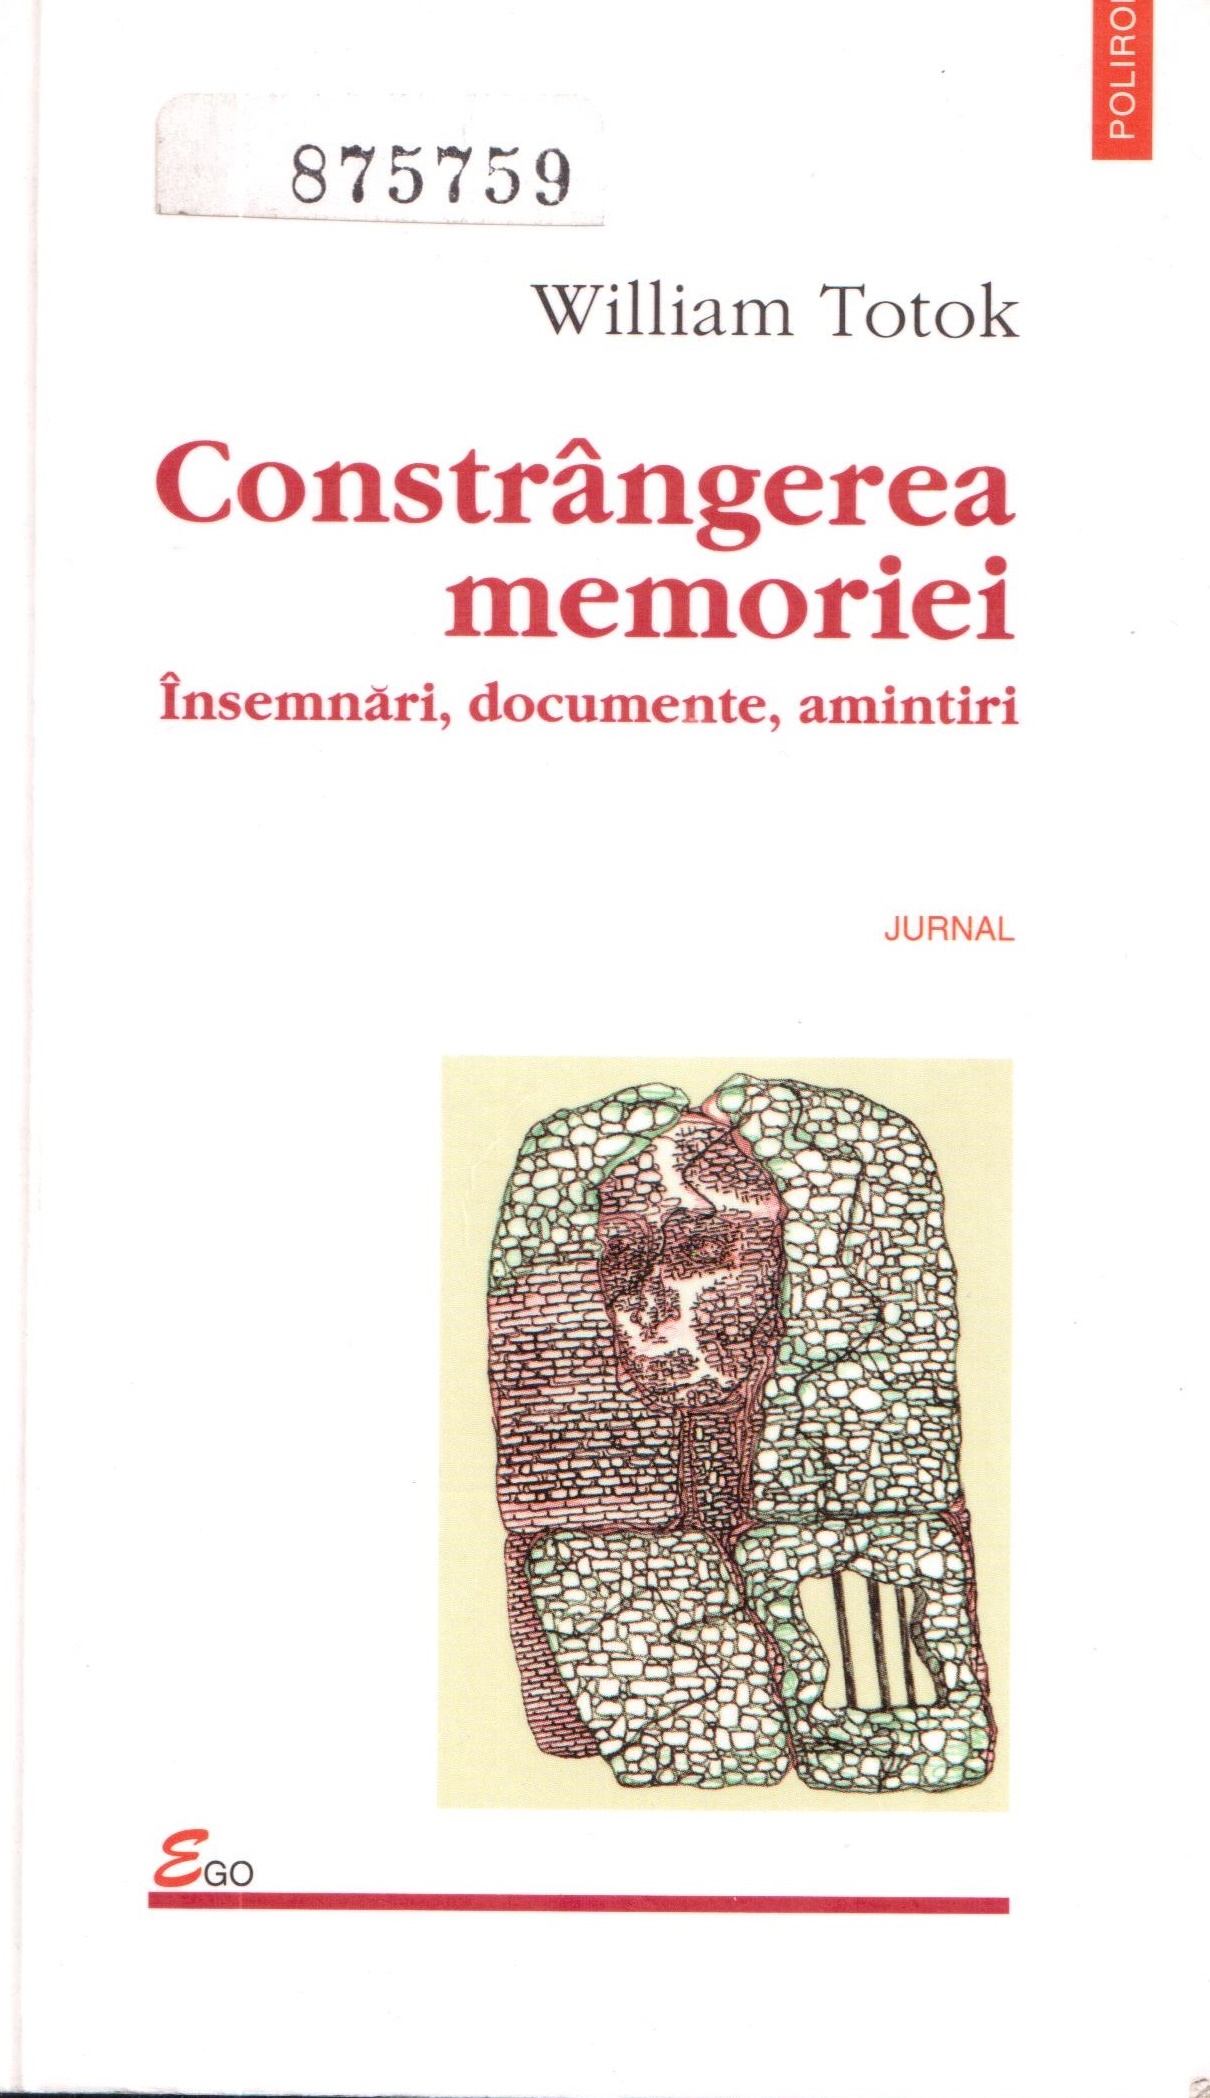 Front cover of the book Constrângerea memoriei. Însemnări, documente, amintiri (The constraint of memory: notes, documents, memories) by William Totok